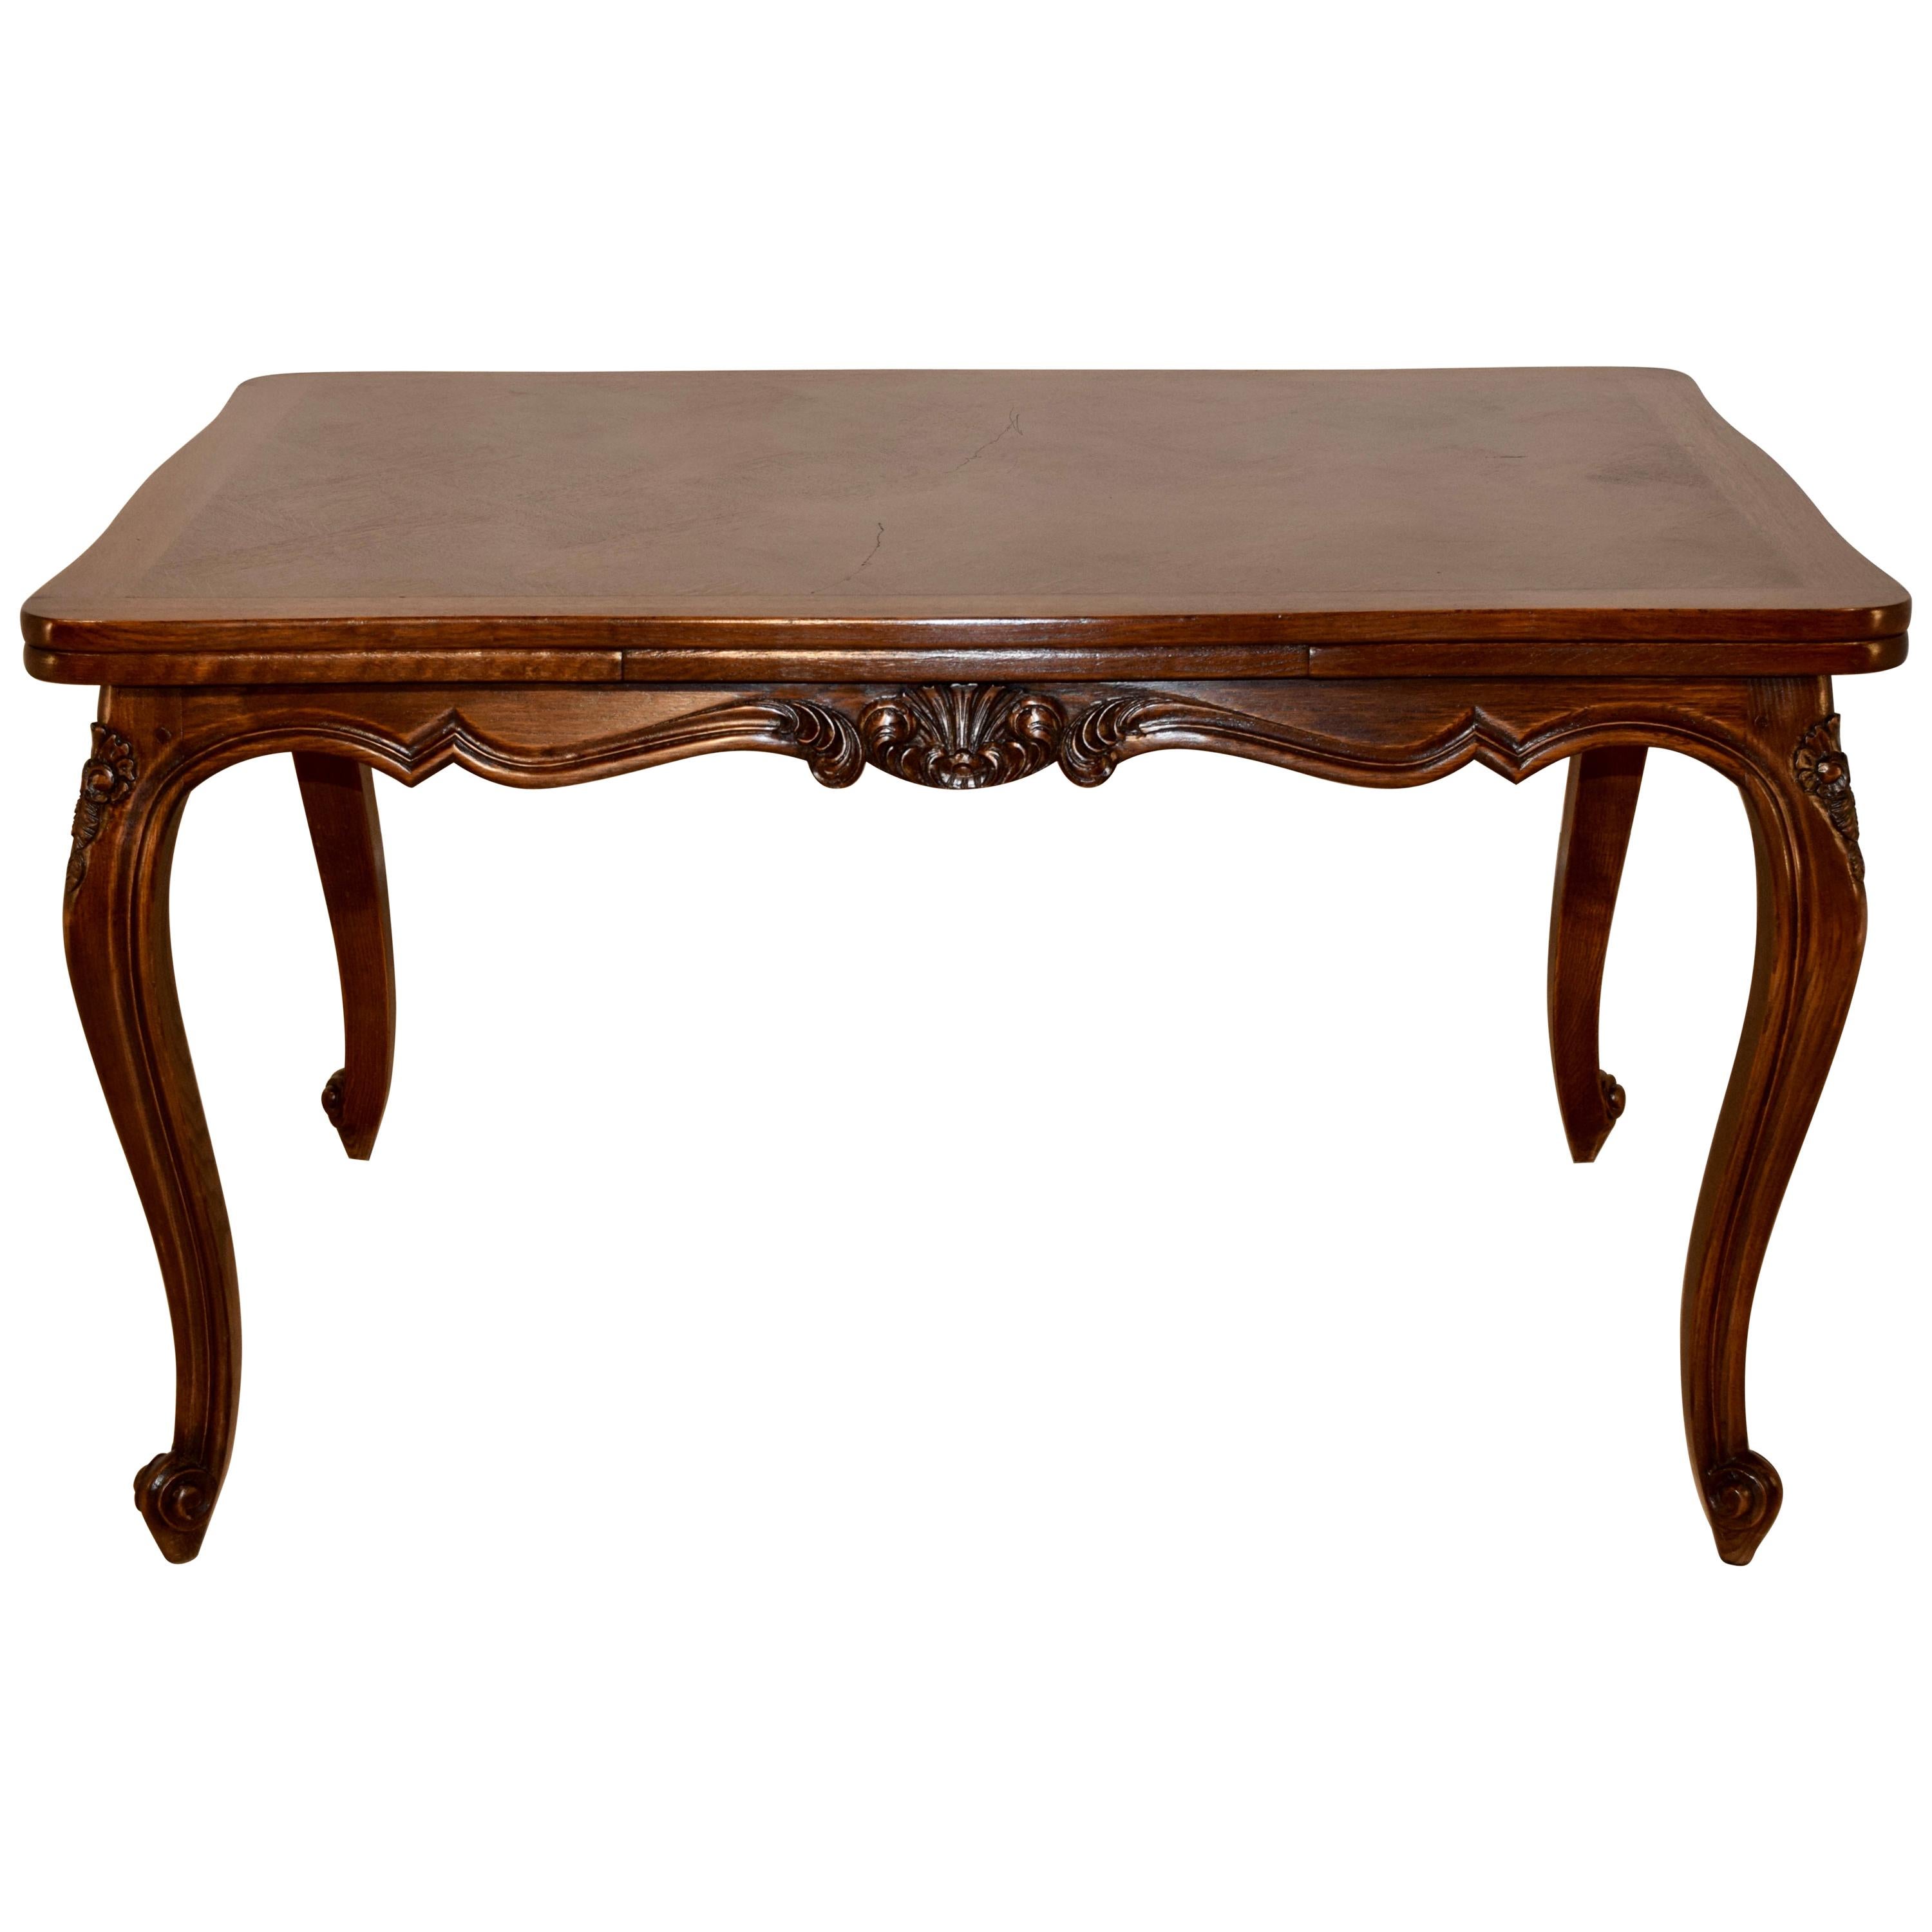 Late 19th Century French Draw Leaf Table